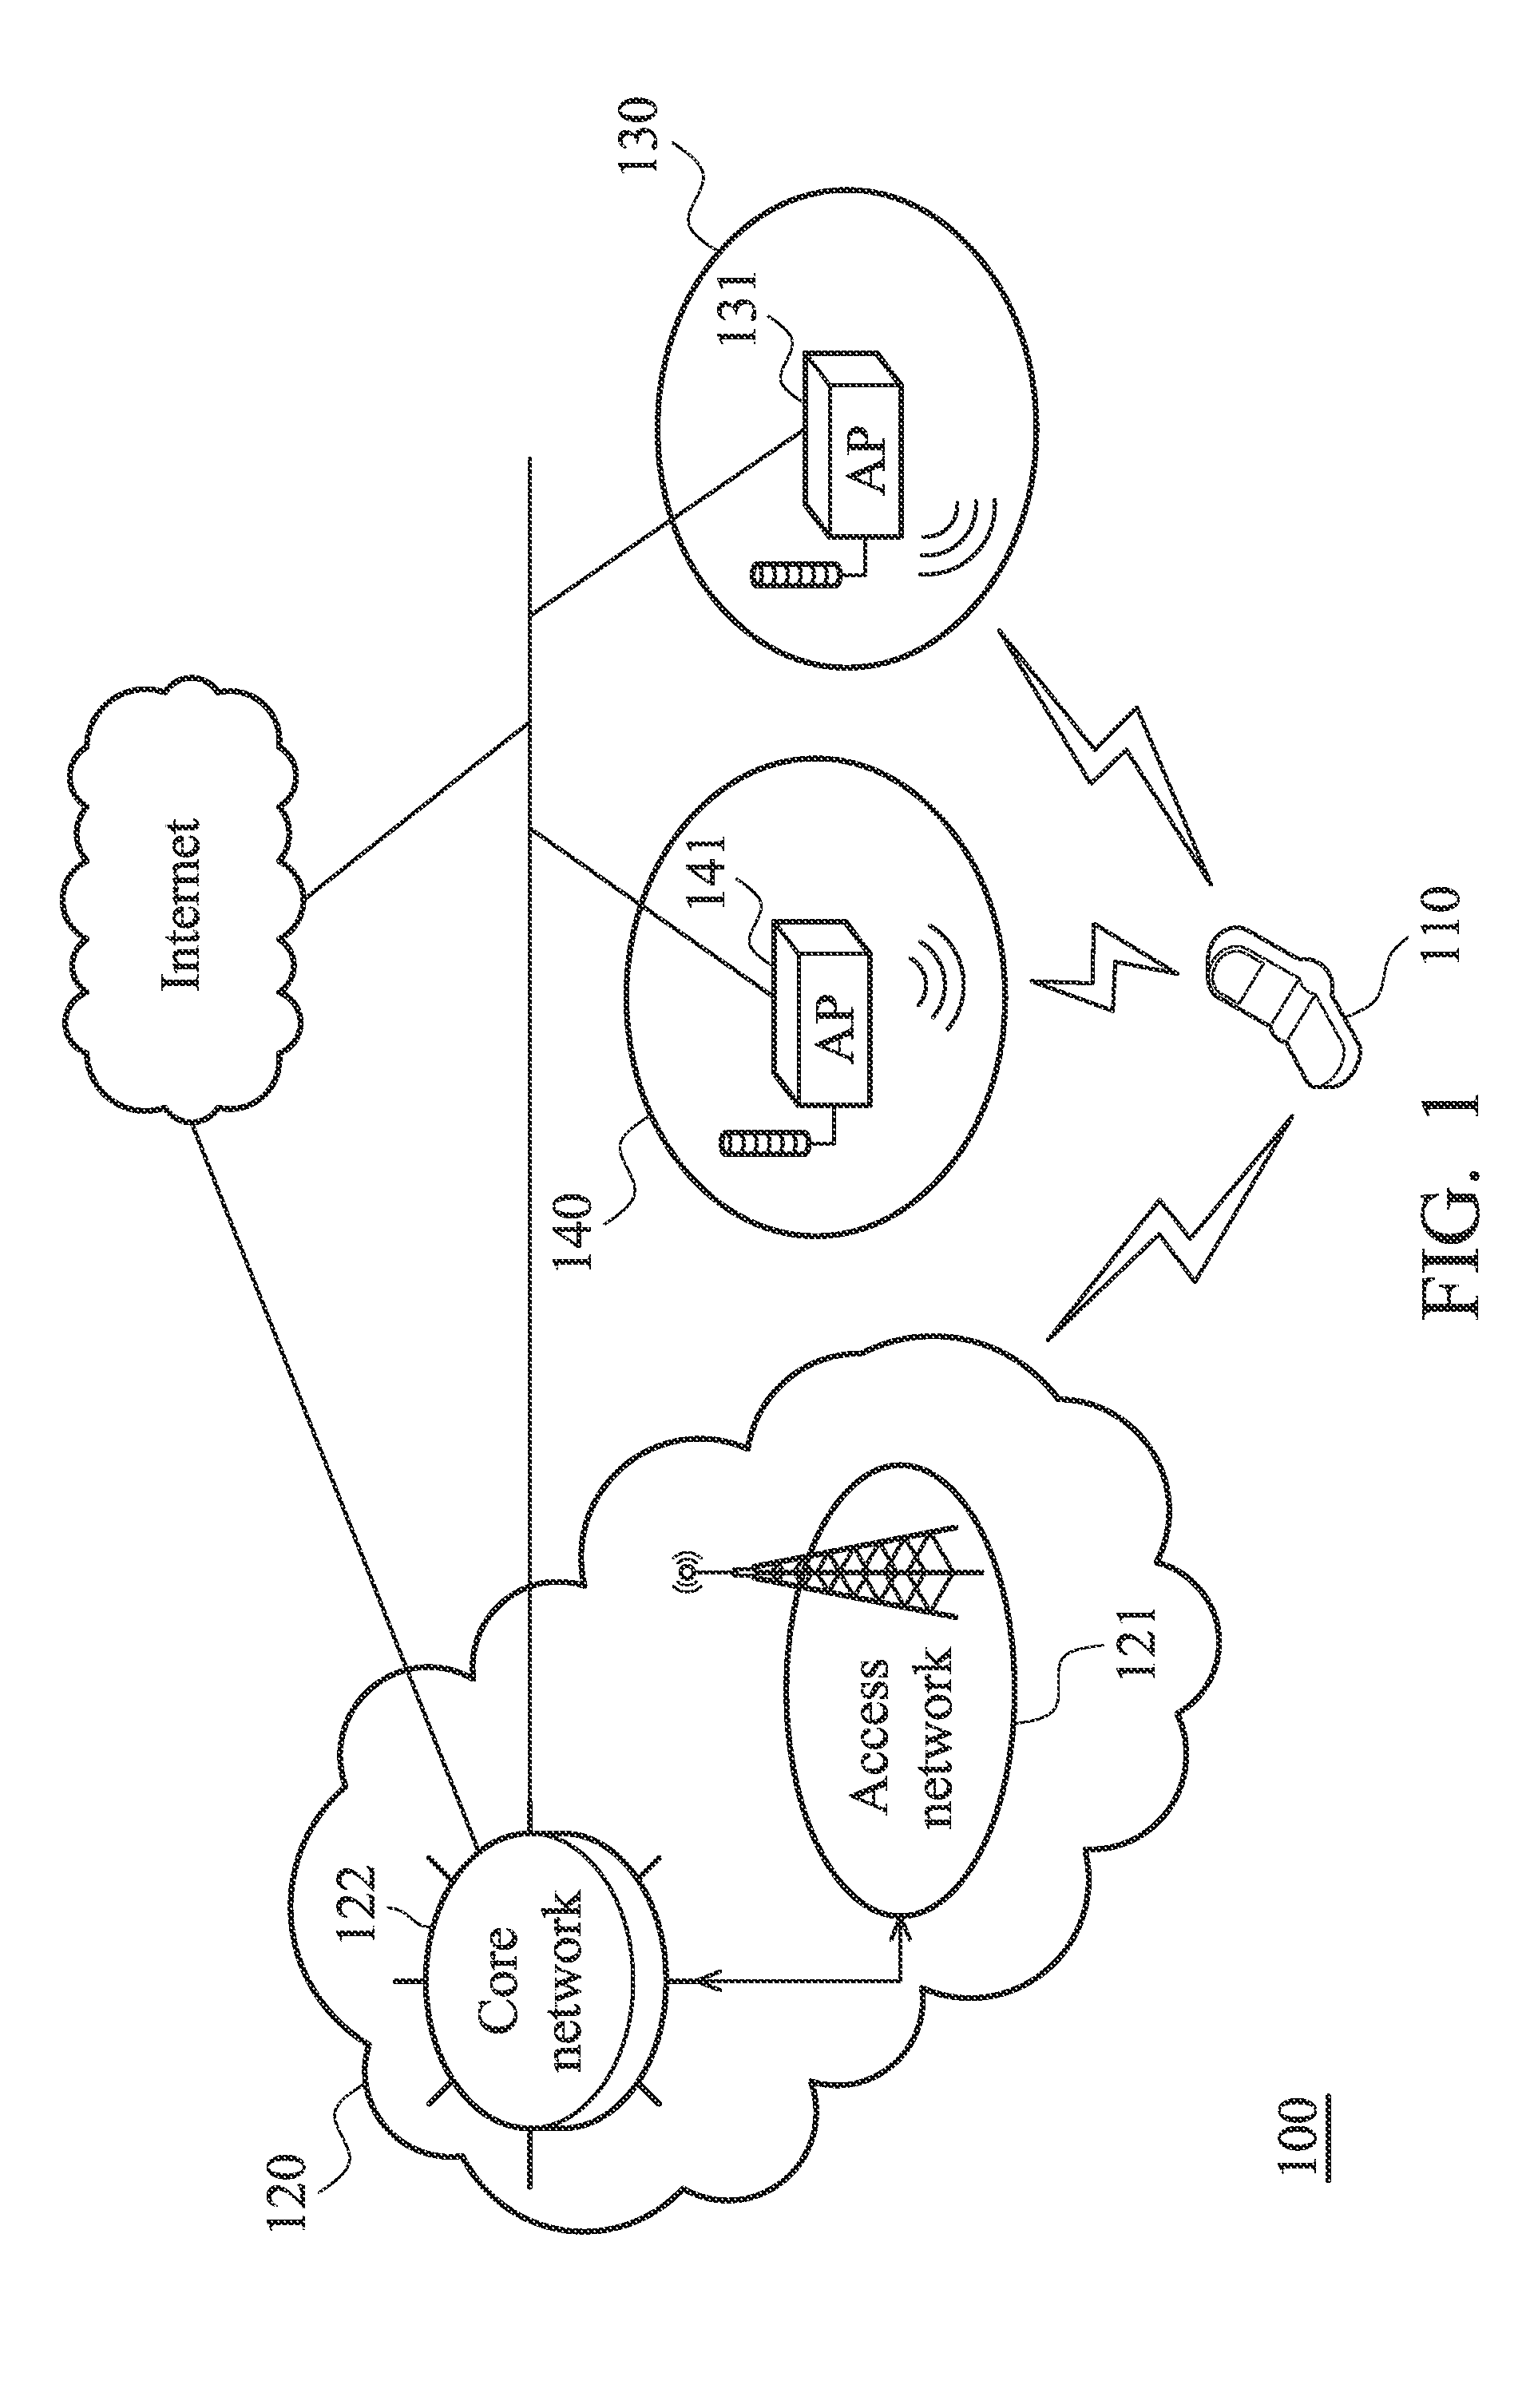 Apparatuses, systems, and methods for offloading data traffic